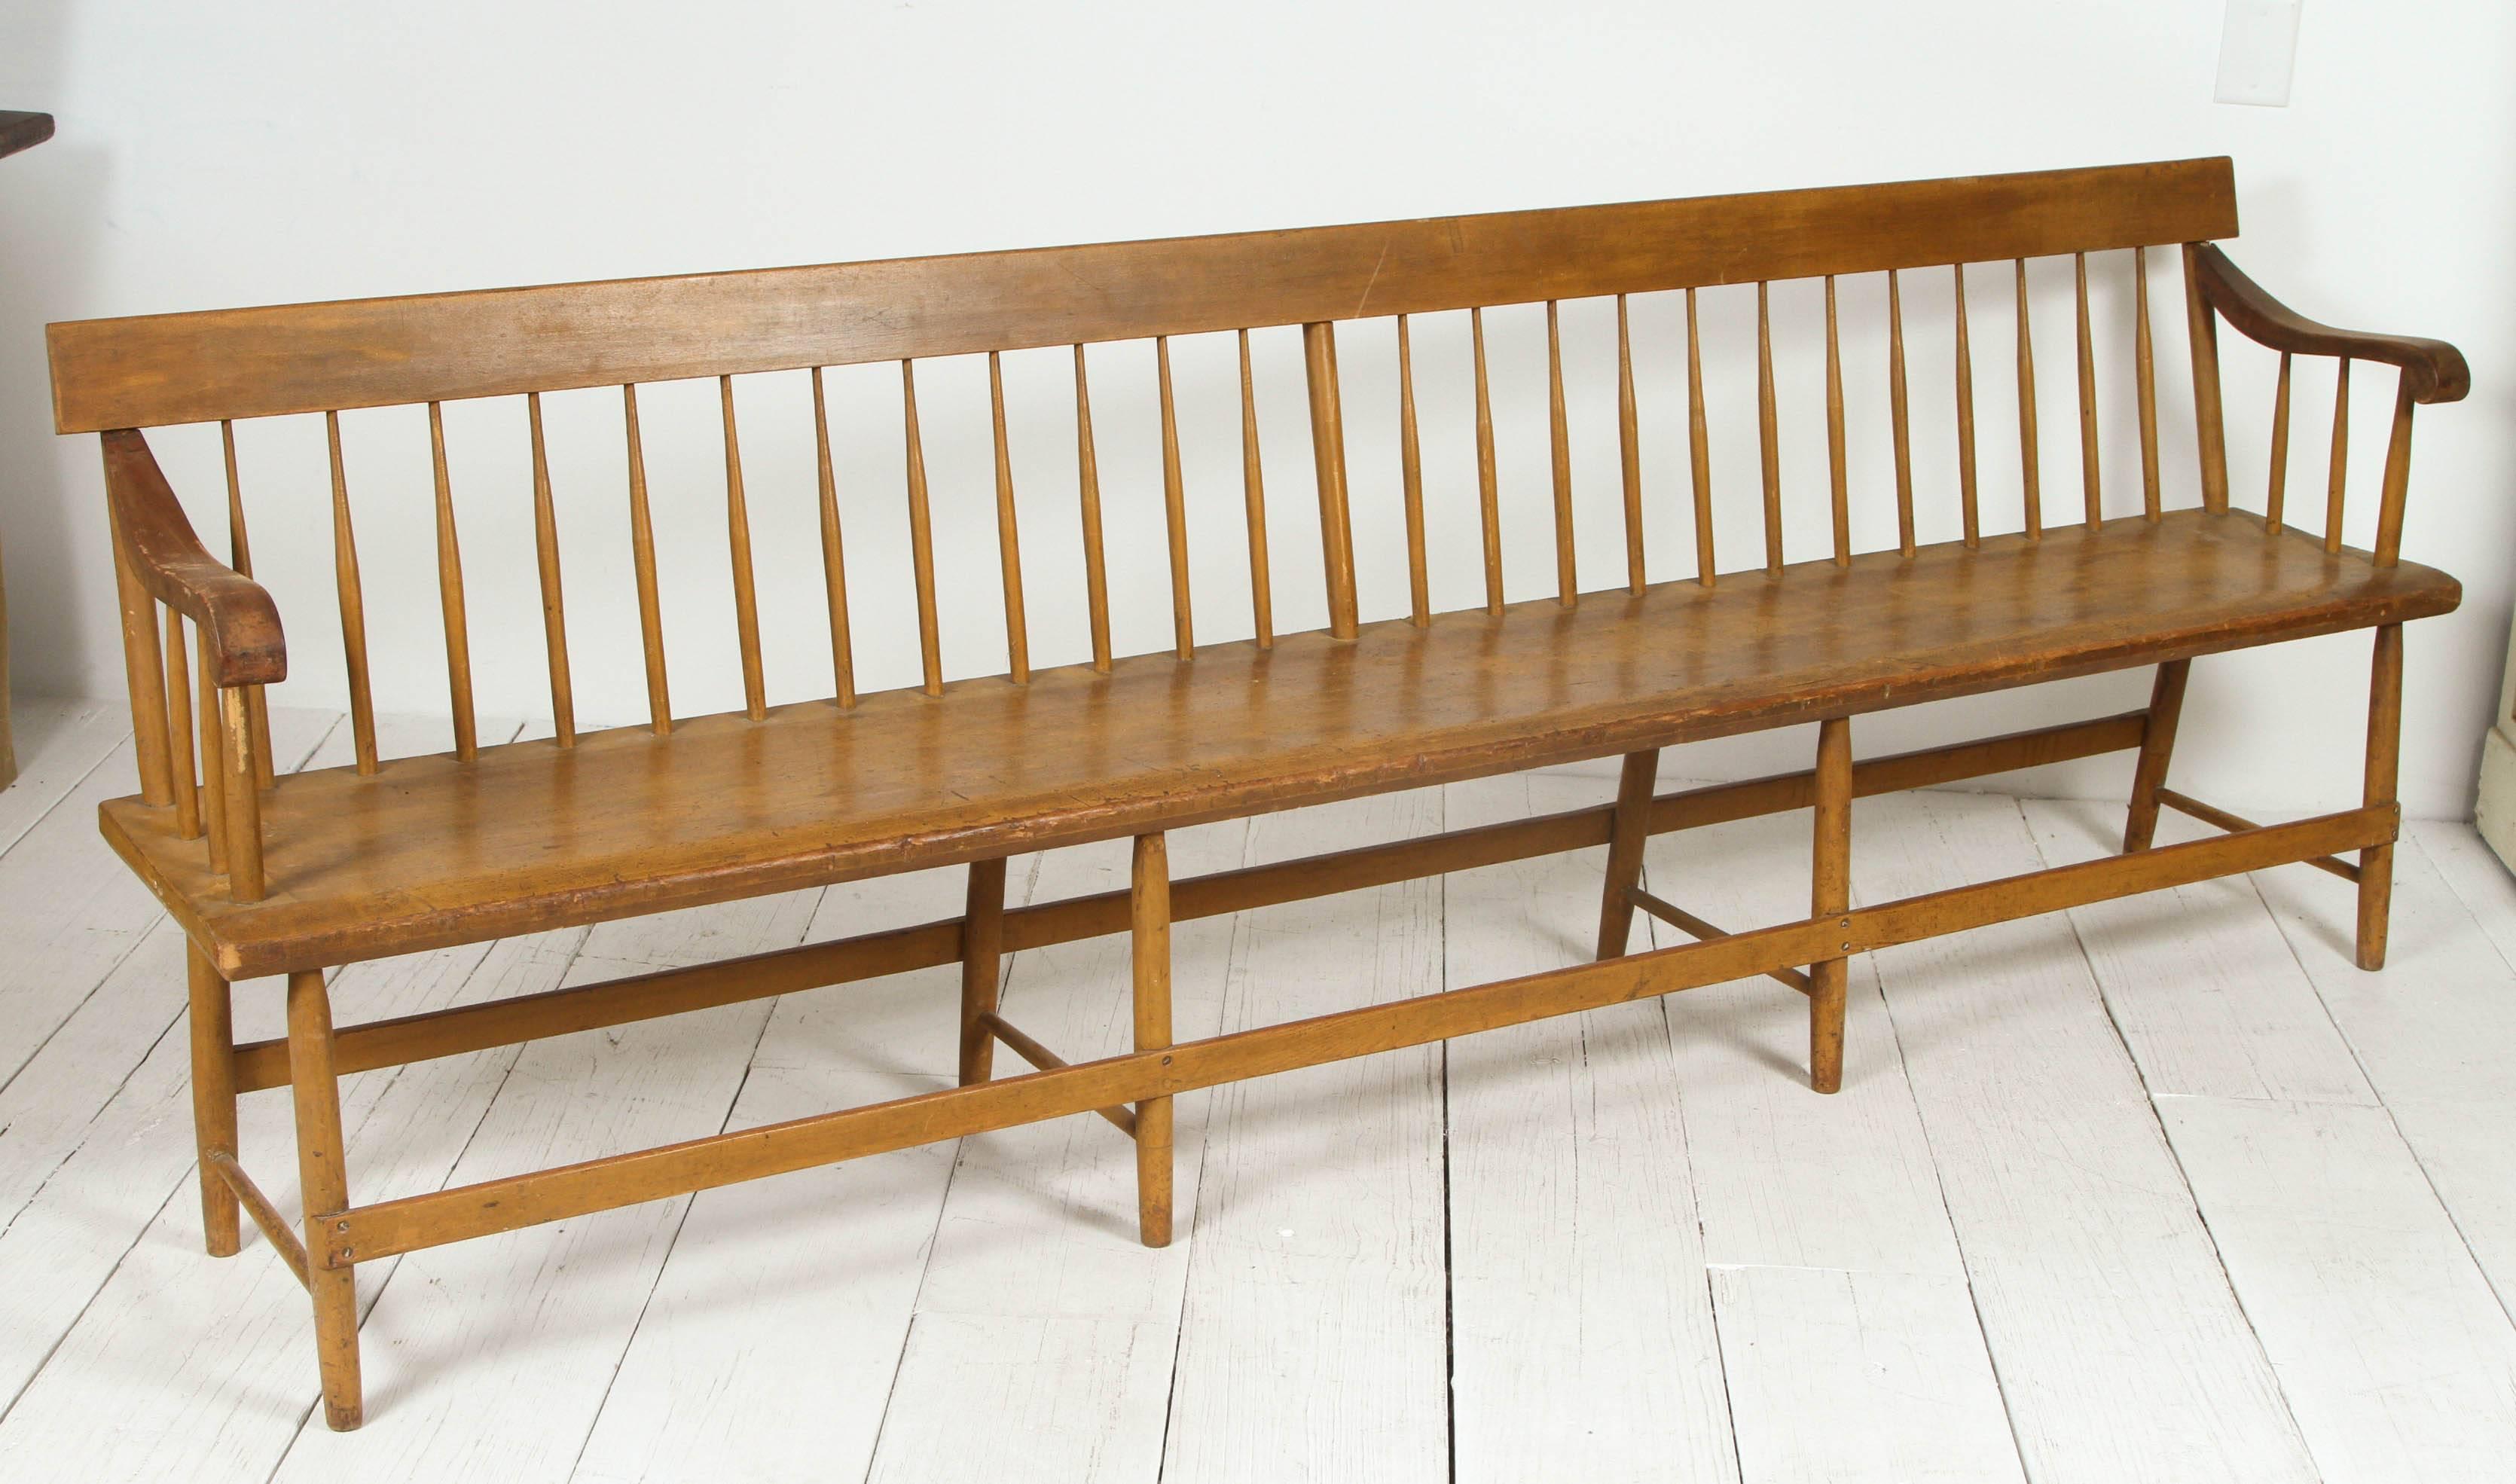 Rustic Long Spindle Back Deacon Bench